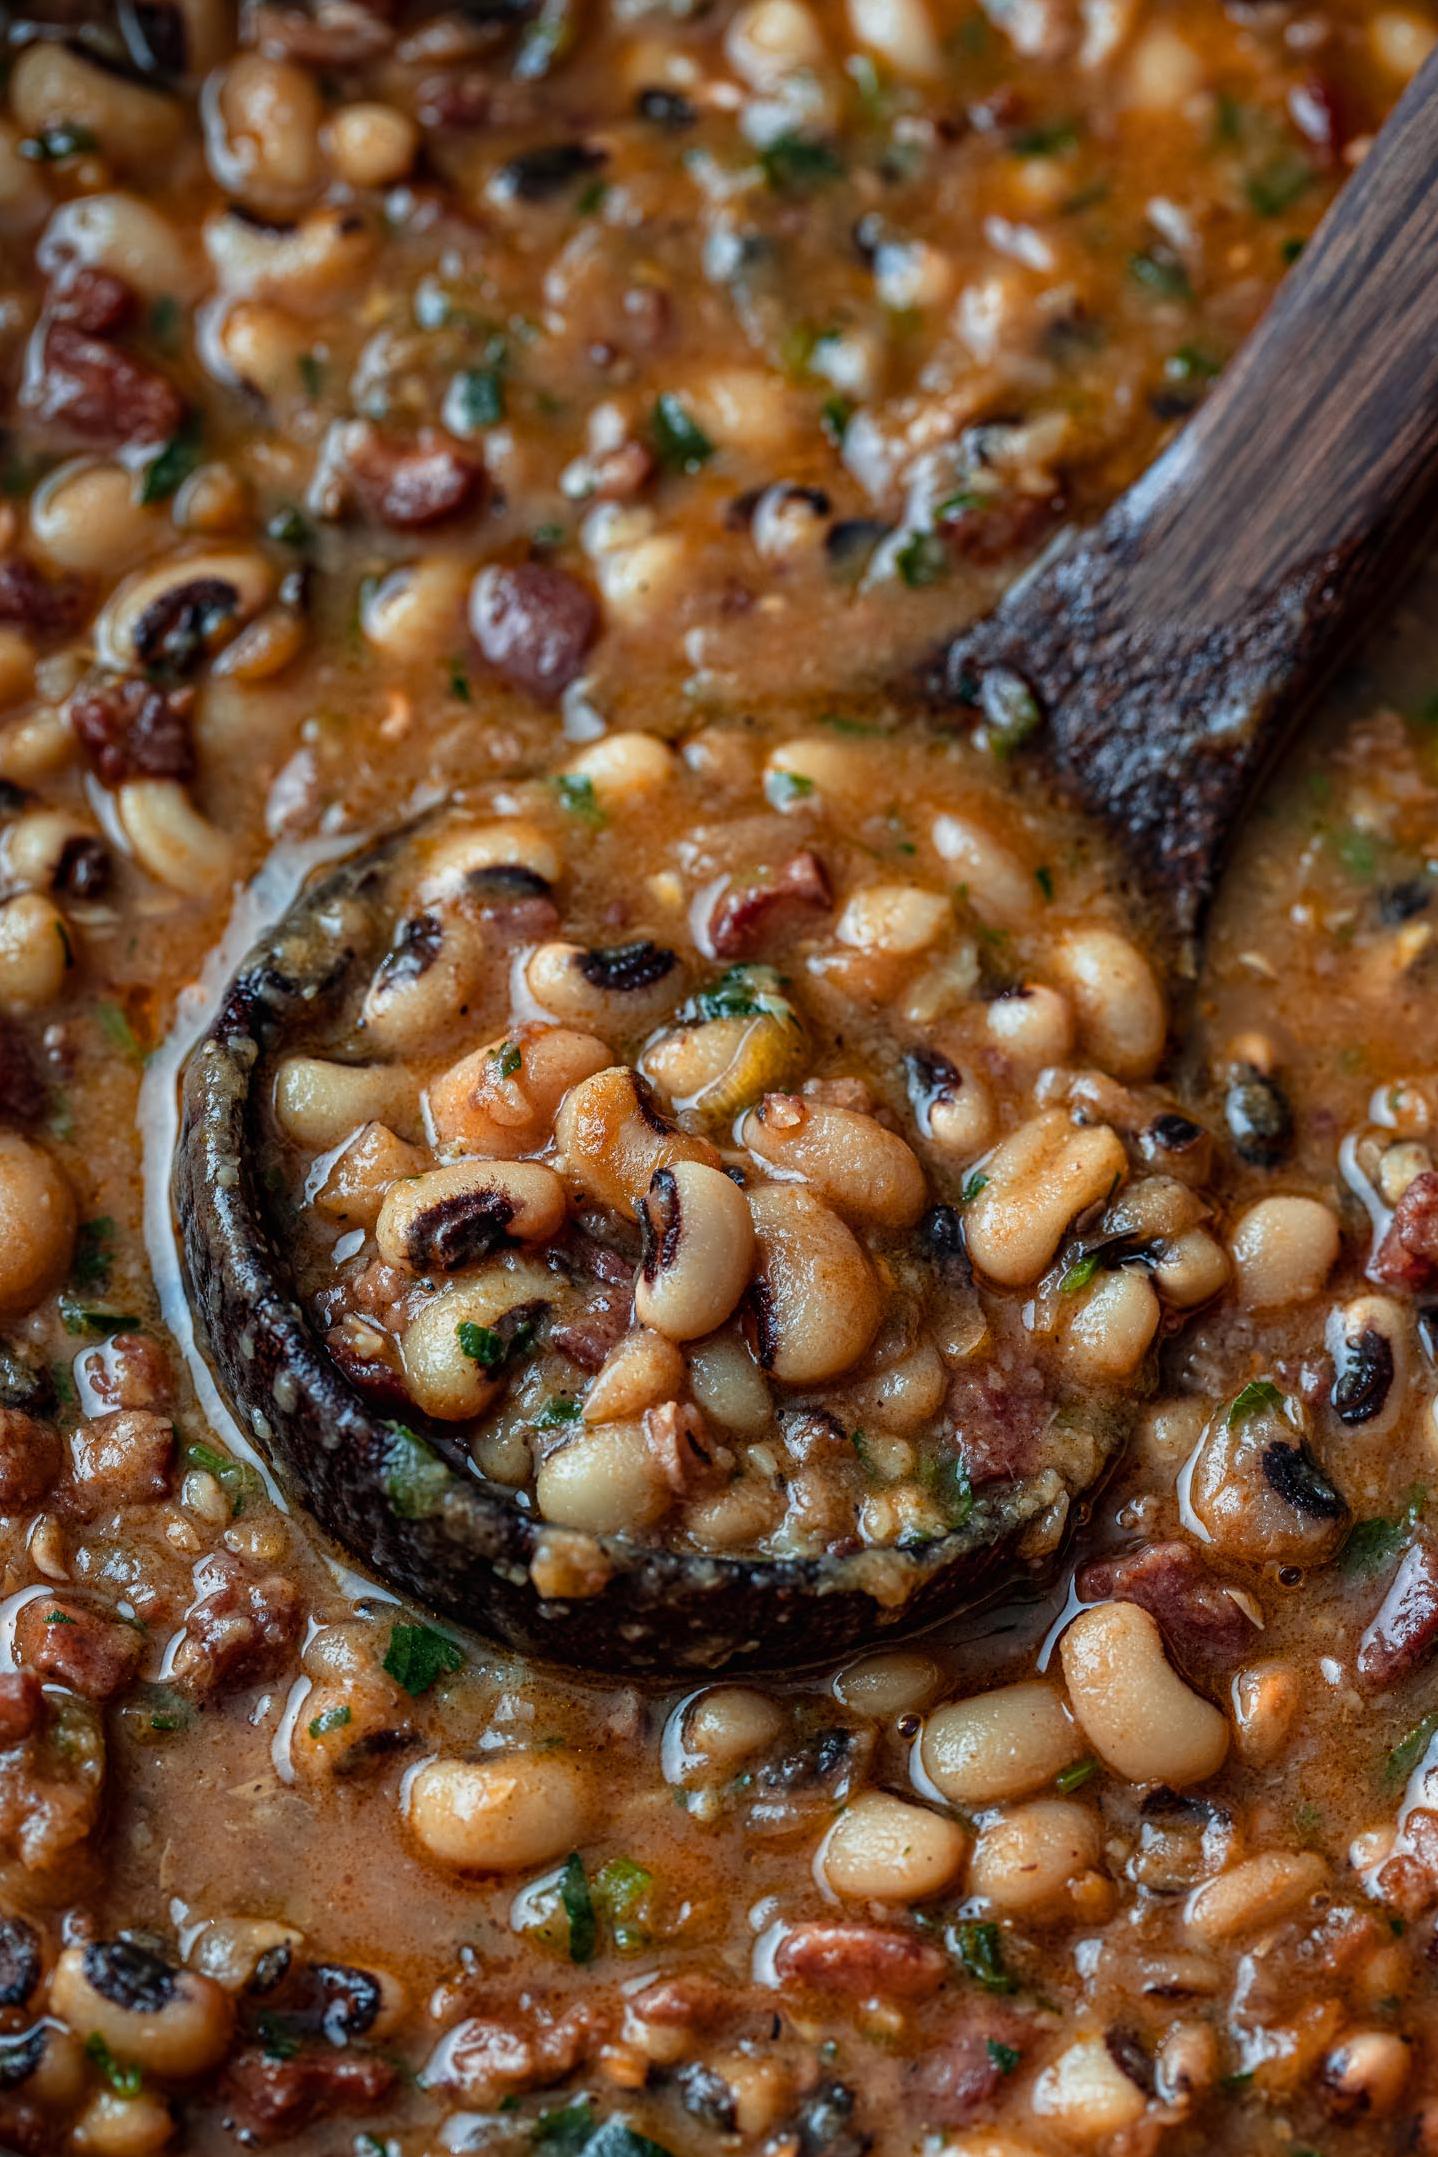  These black-eyed peas are perfect to make on a lazy Sunday, as they simmer on the stove and fill your home with their delicious aroma.